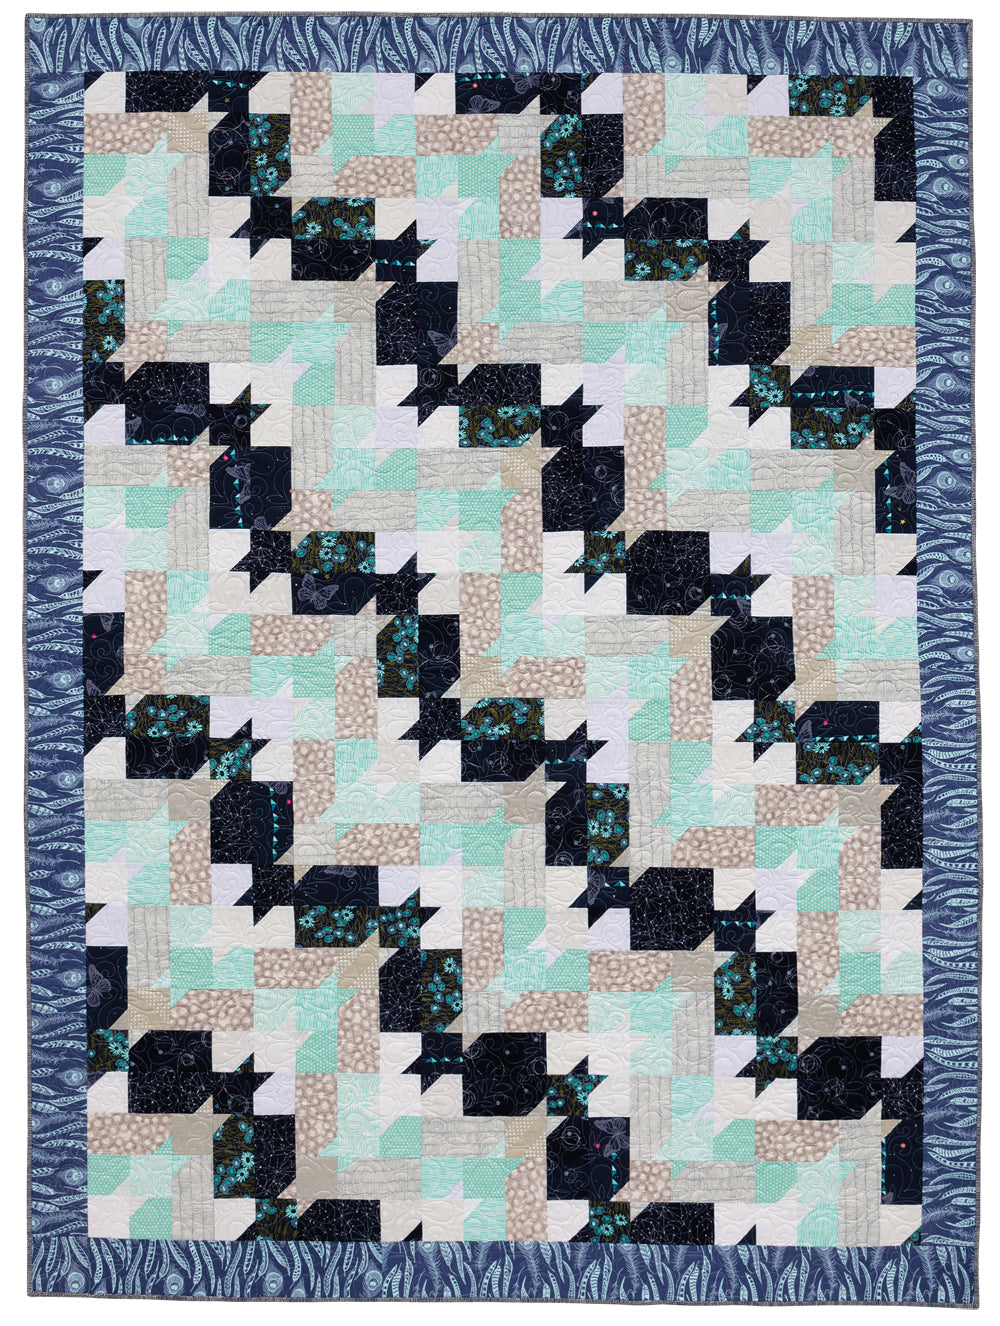 Soaring {Handmade Quilt by Amy Ellis}